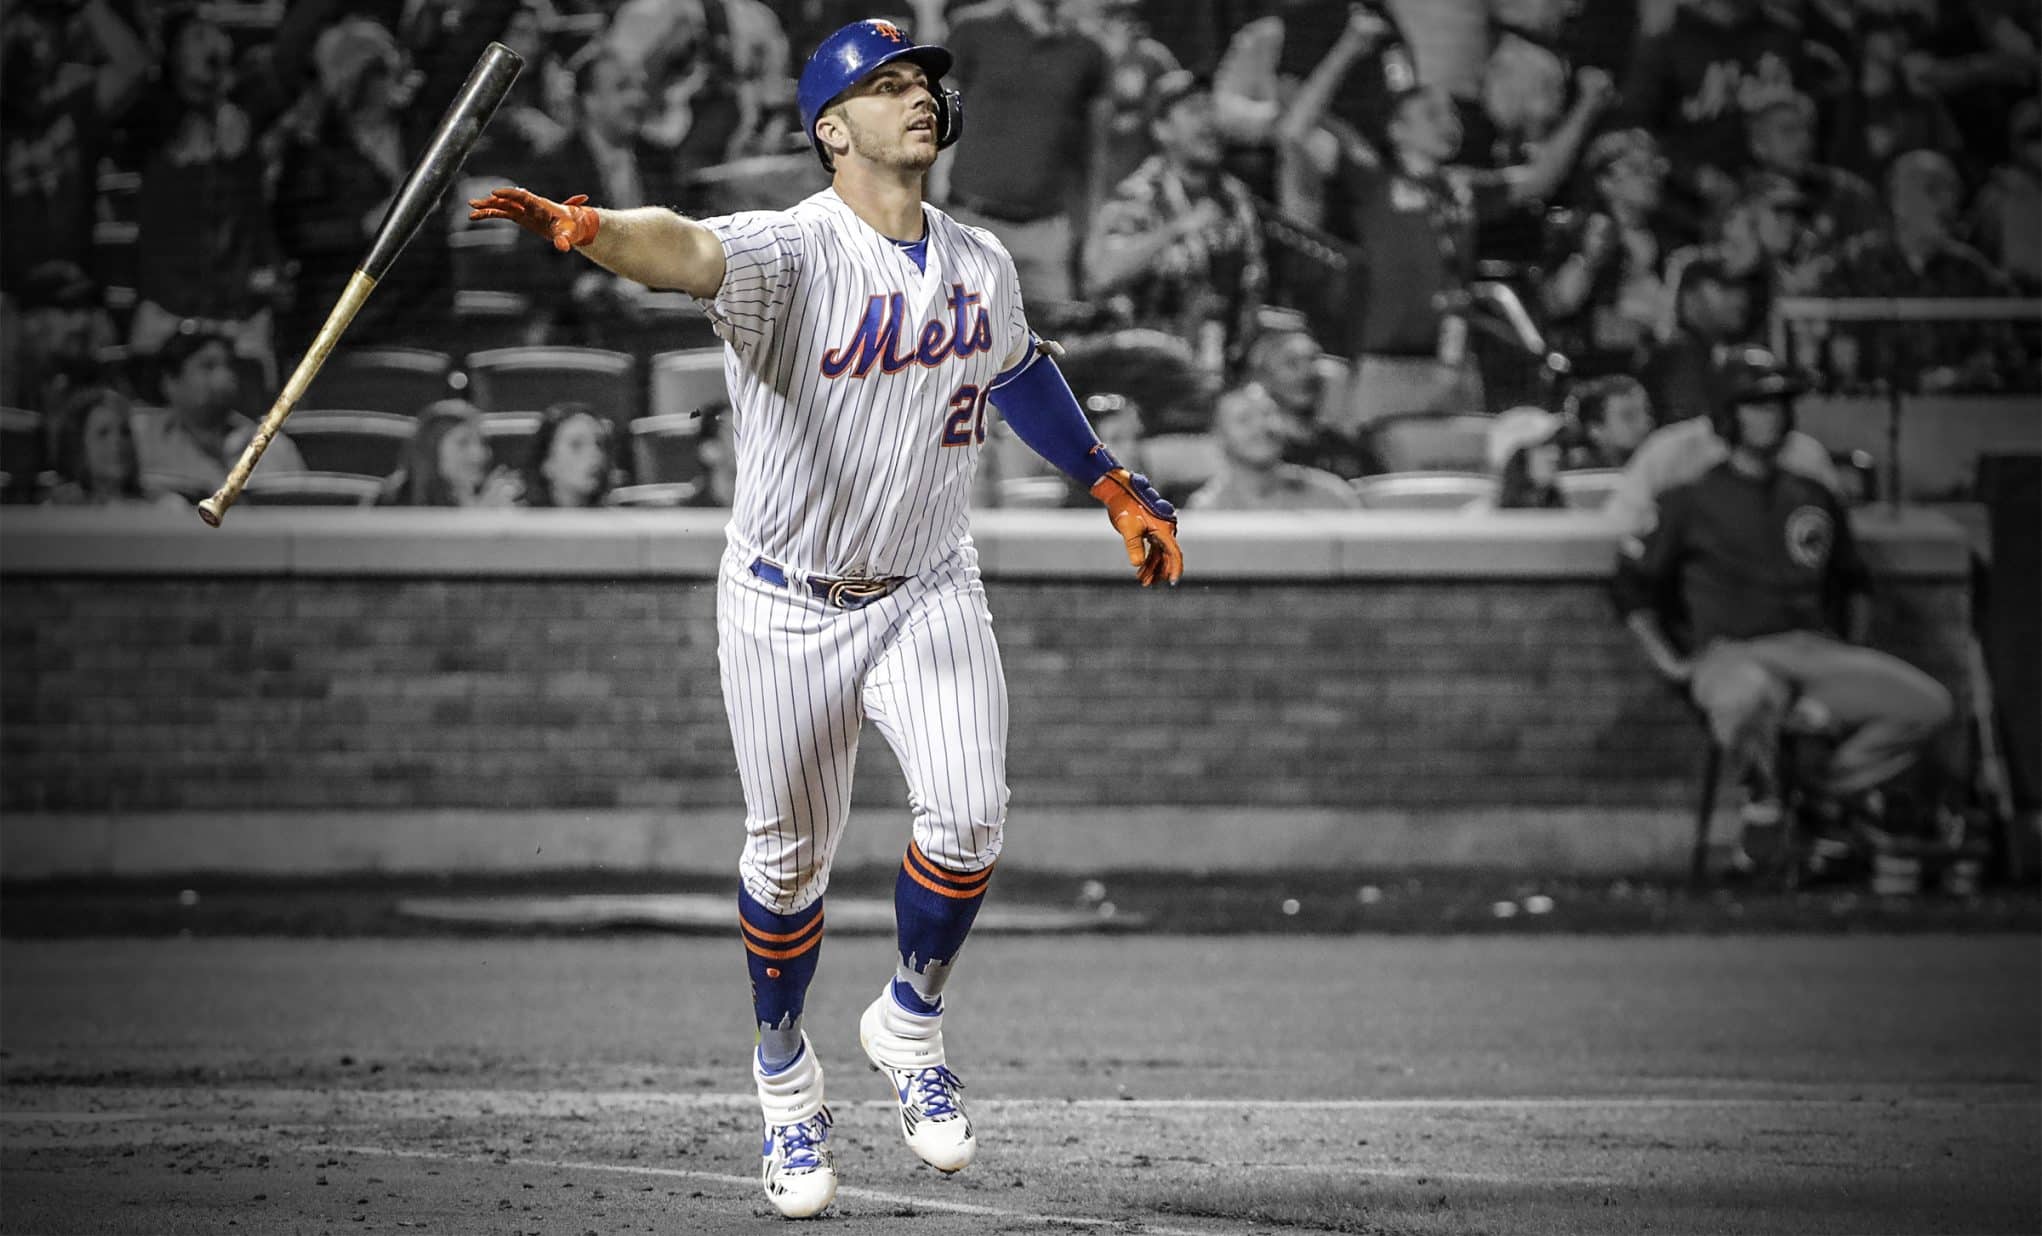 2019 TOPPS NOW #524 PETE ALONSO 474-FT HR MARKS METS RECORD IN STATCAST ERA 